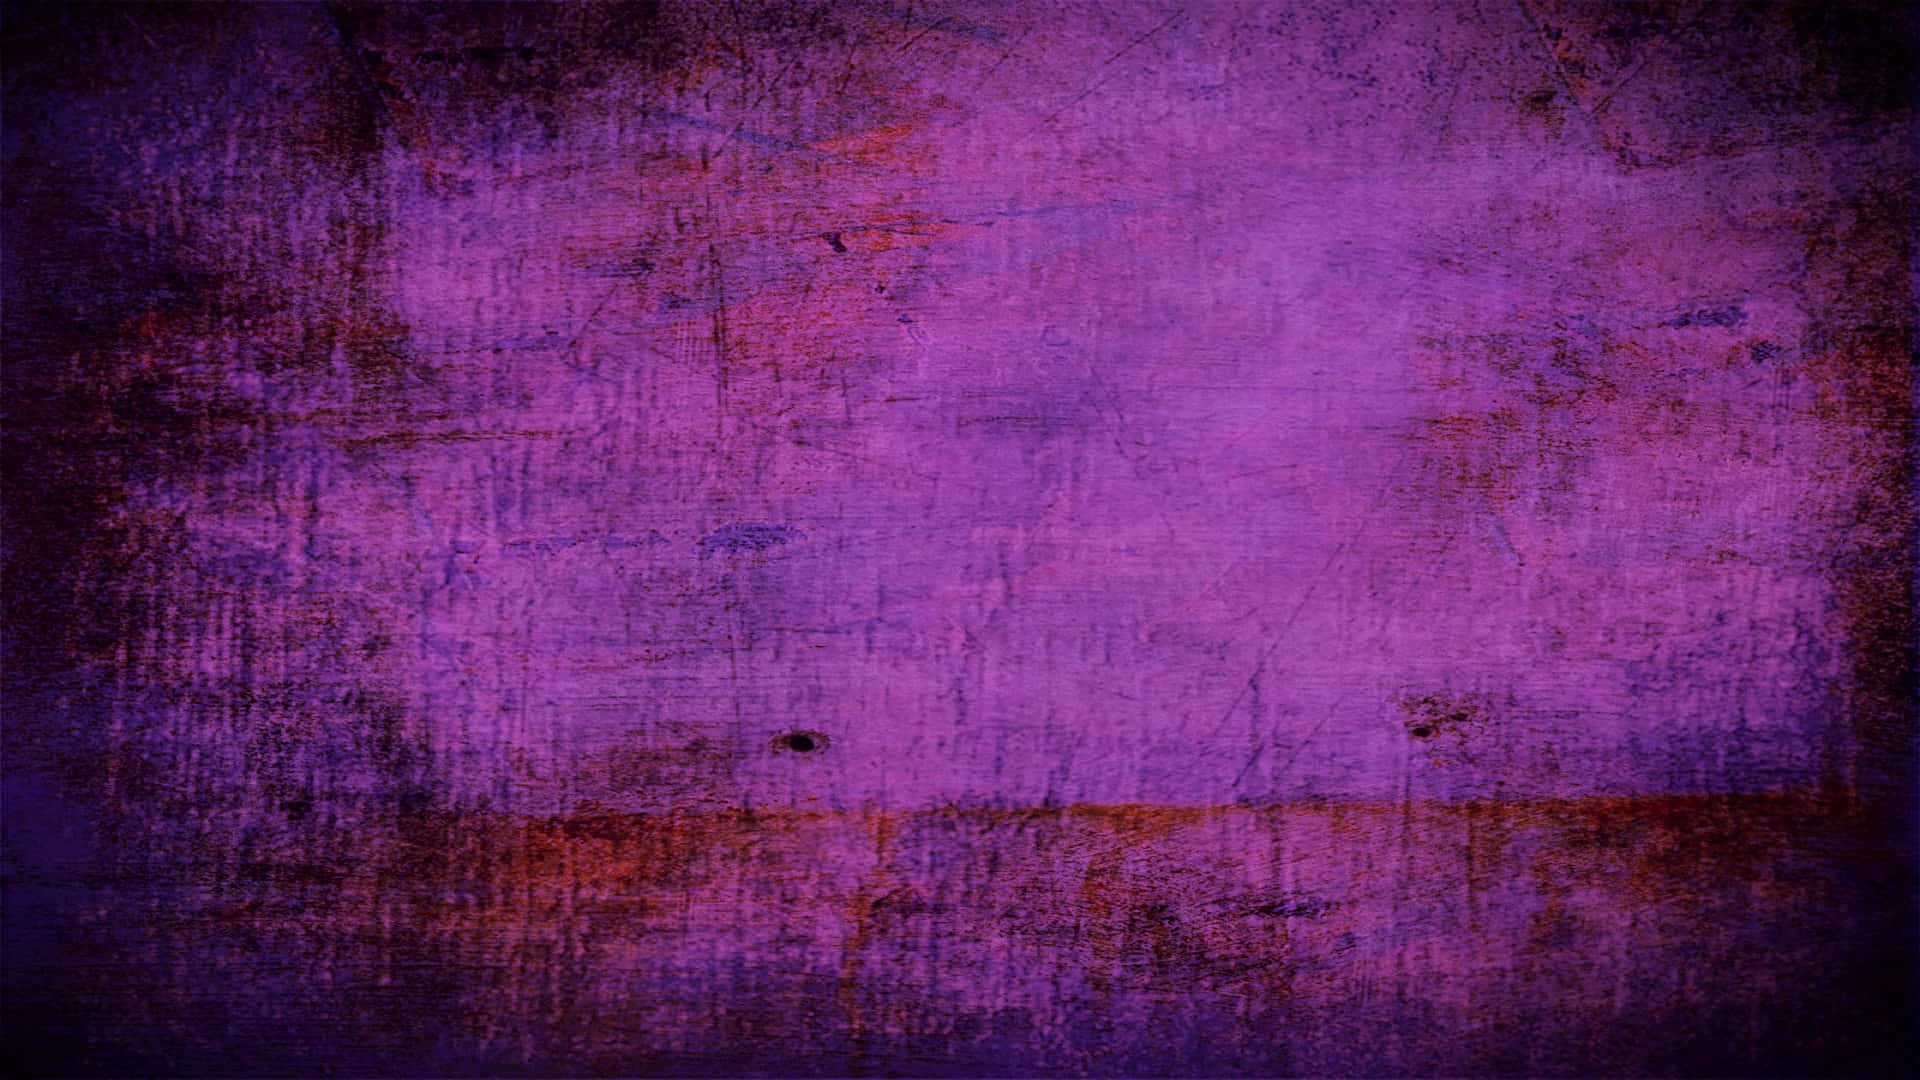 A High Resolution Image of a Purple Textured Background